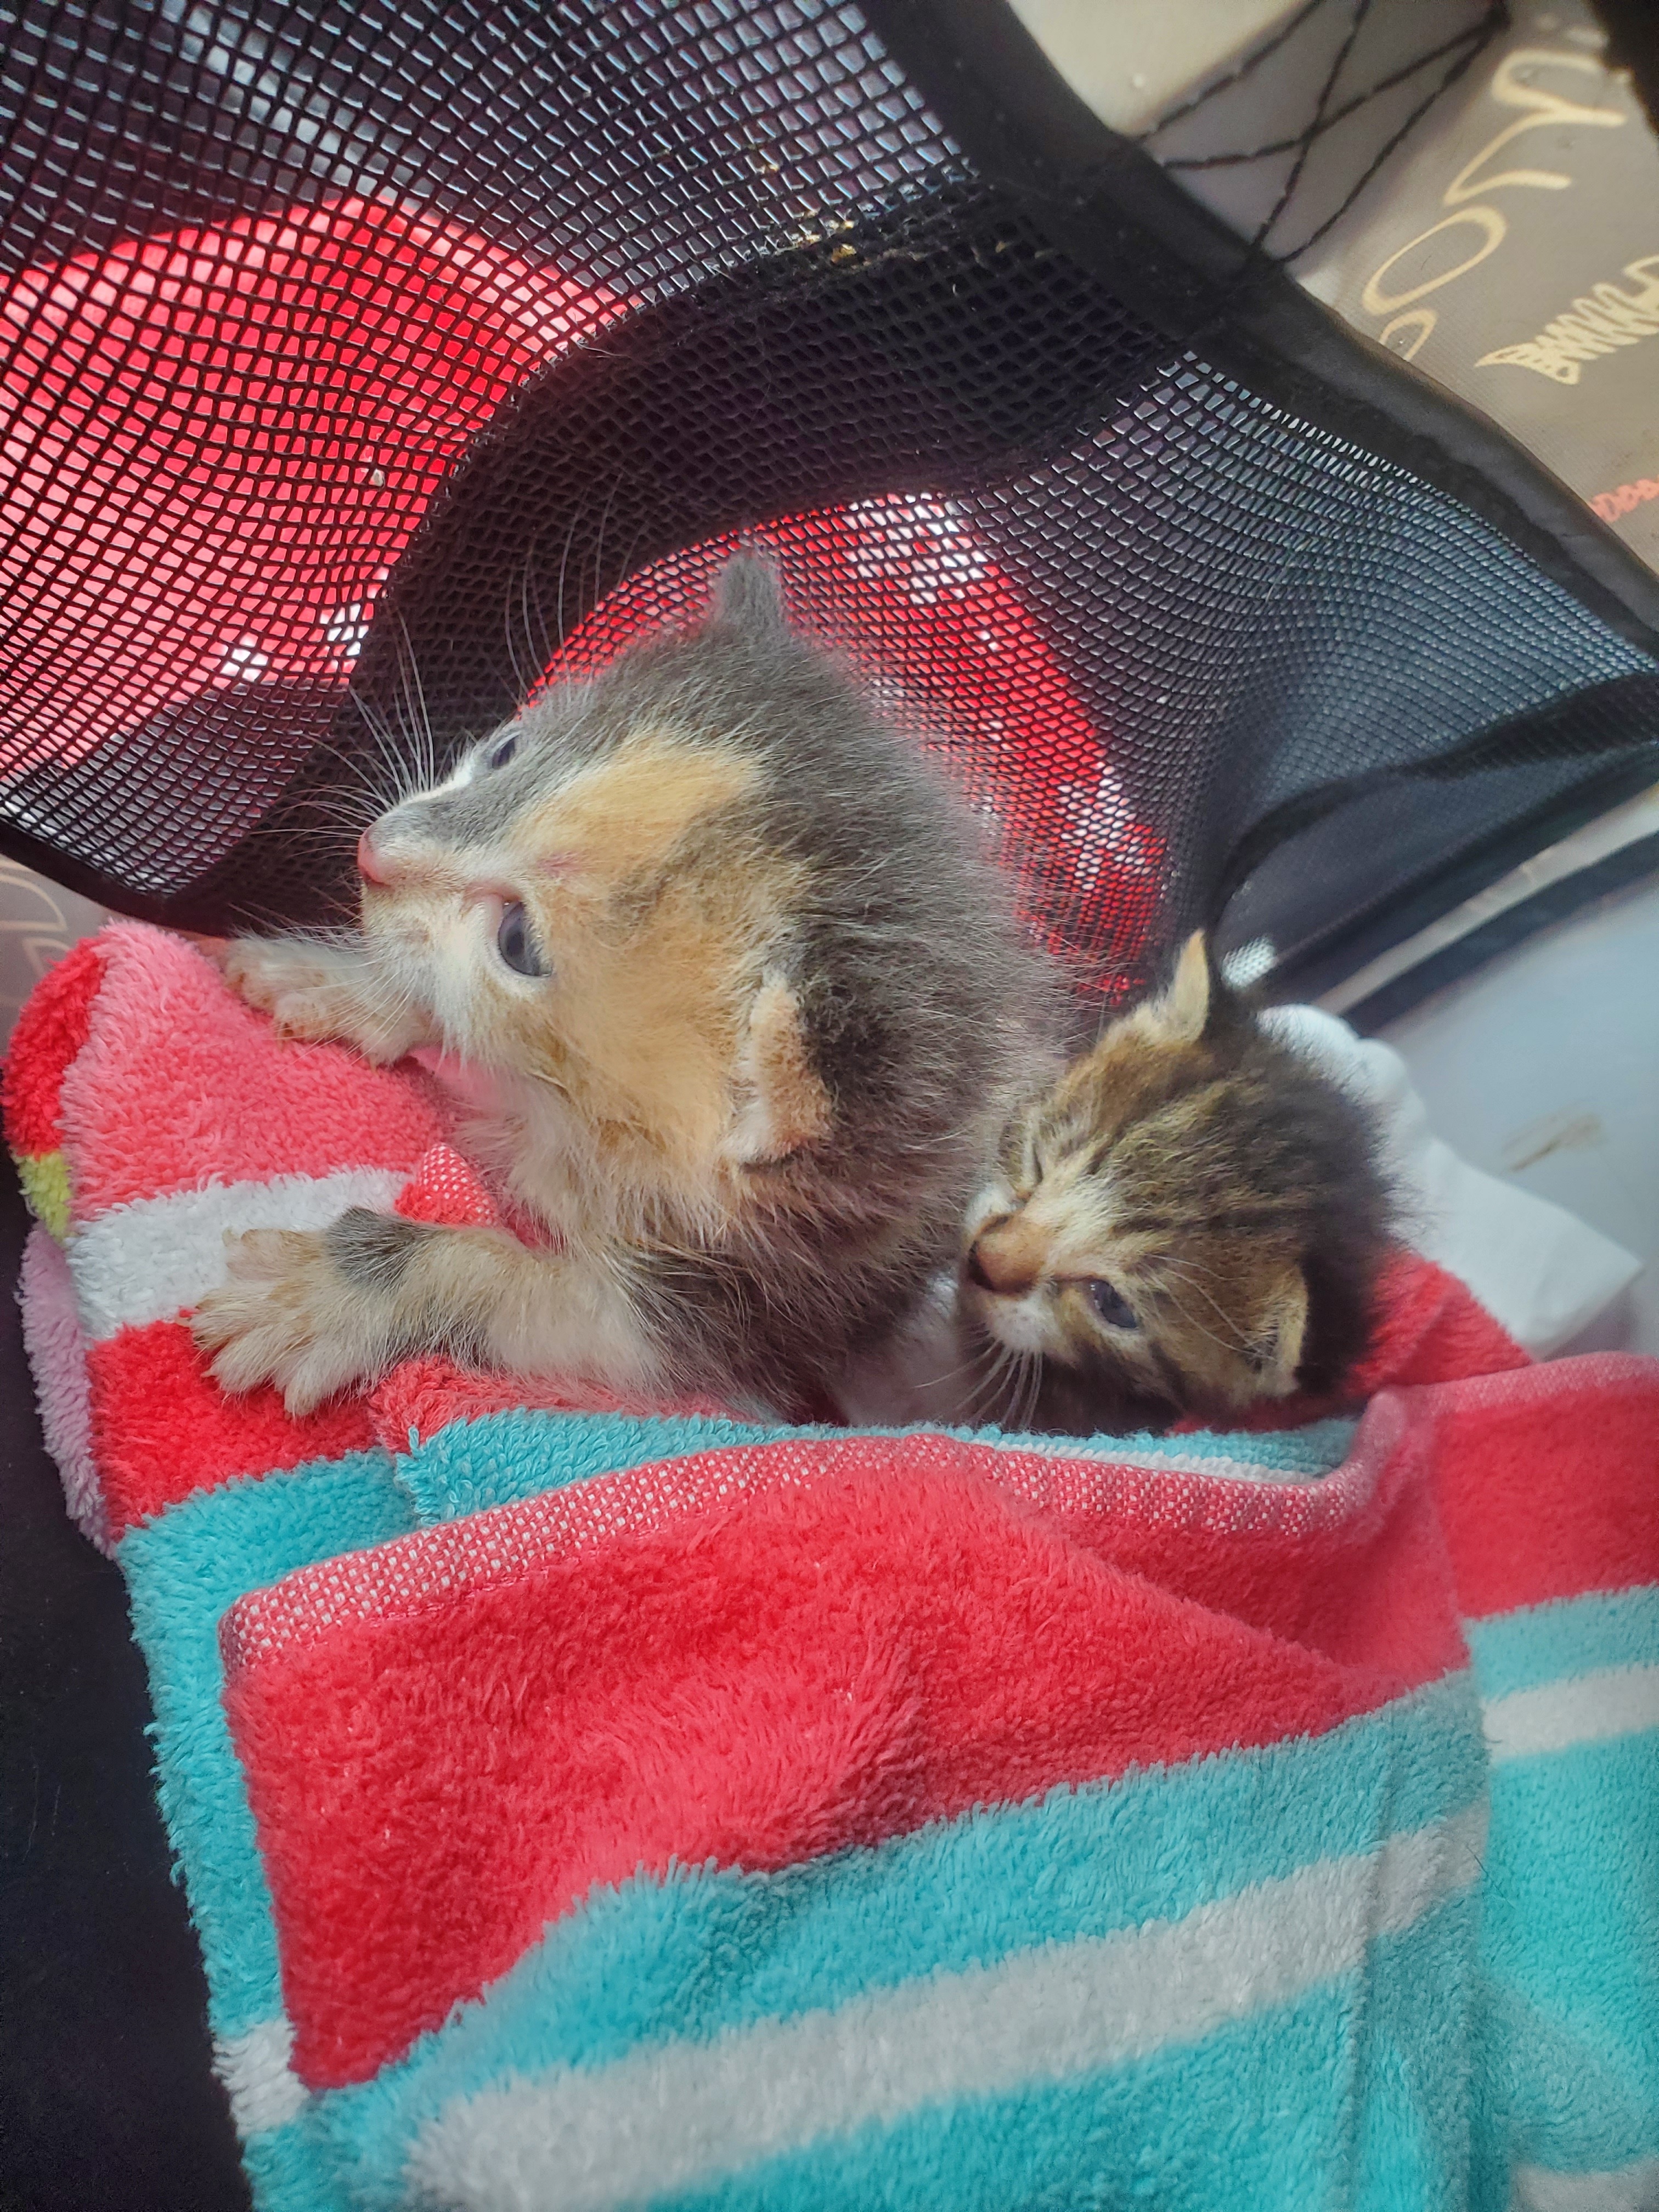 Rescued from Miami. Mom didn't come back & their siblings died overnight.